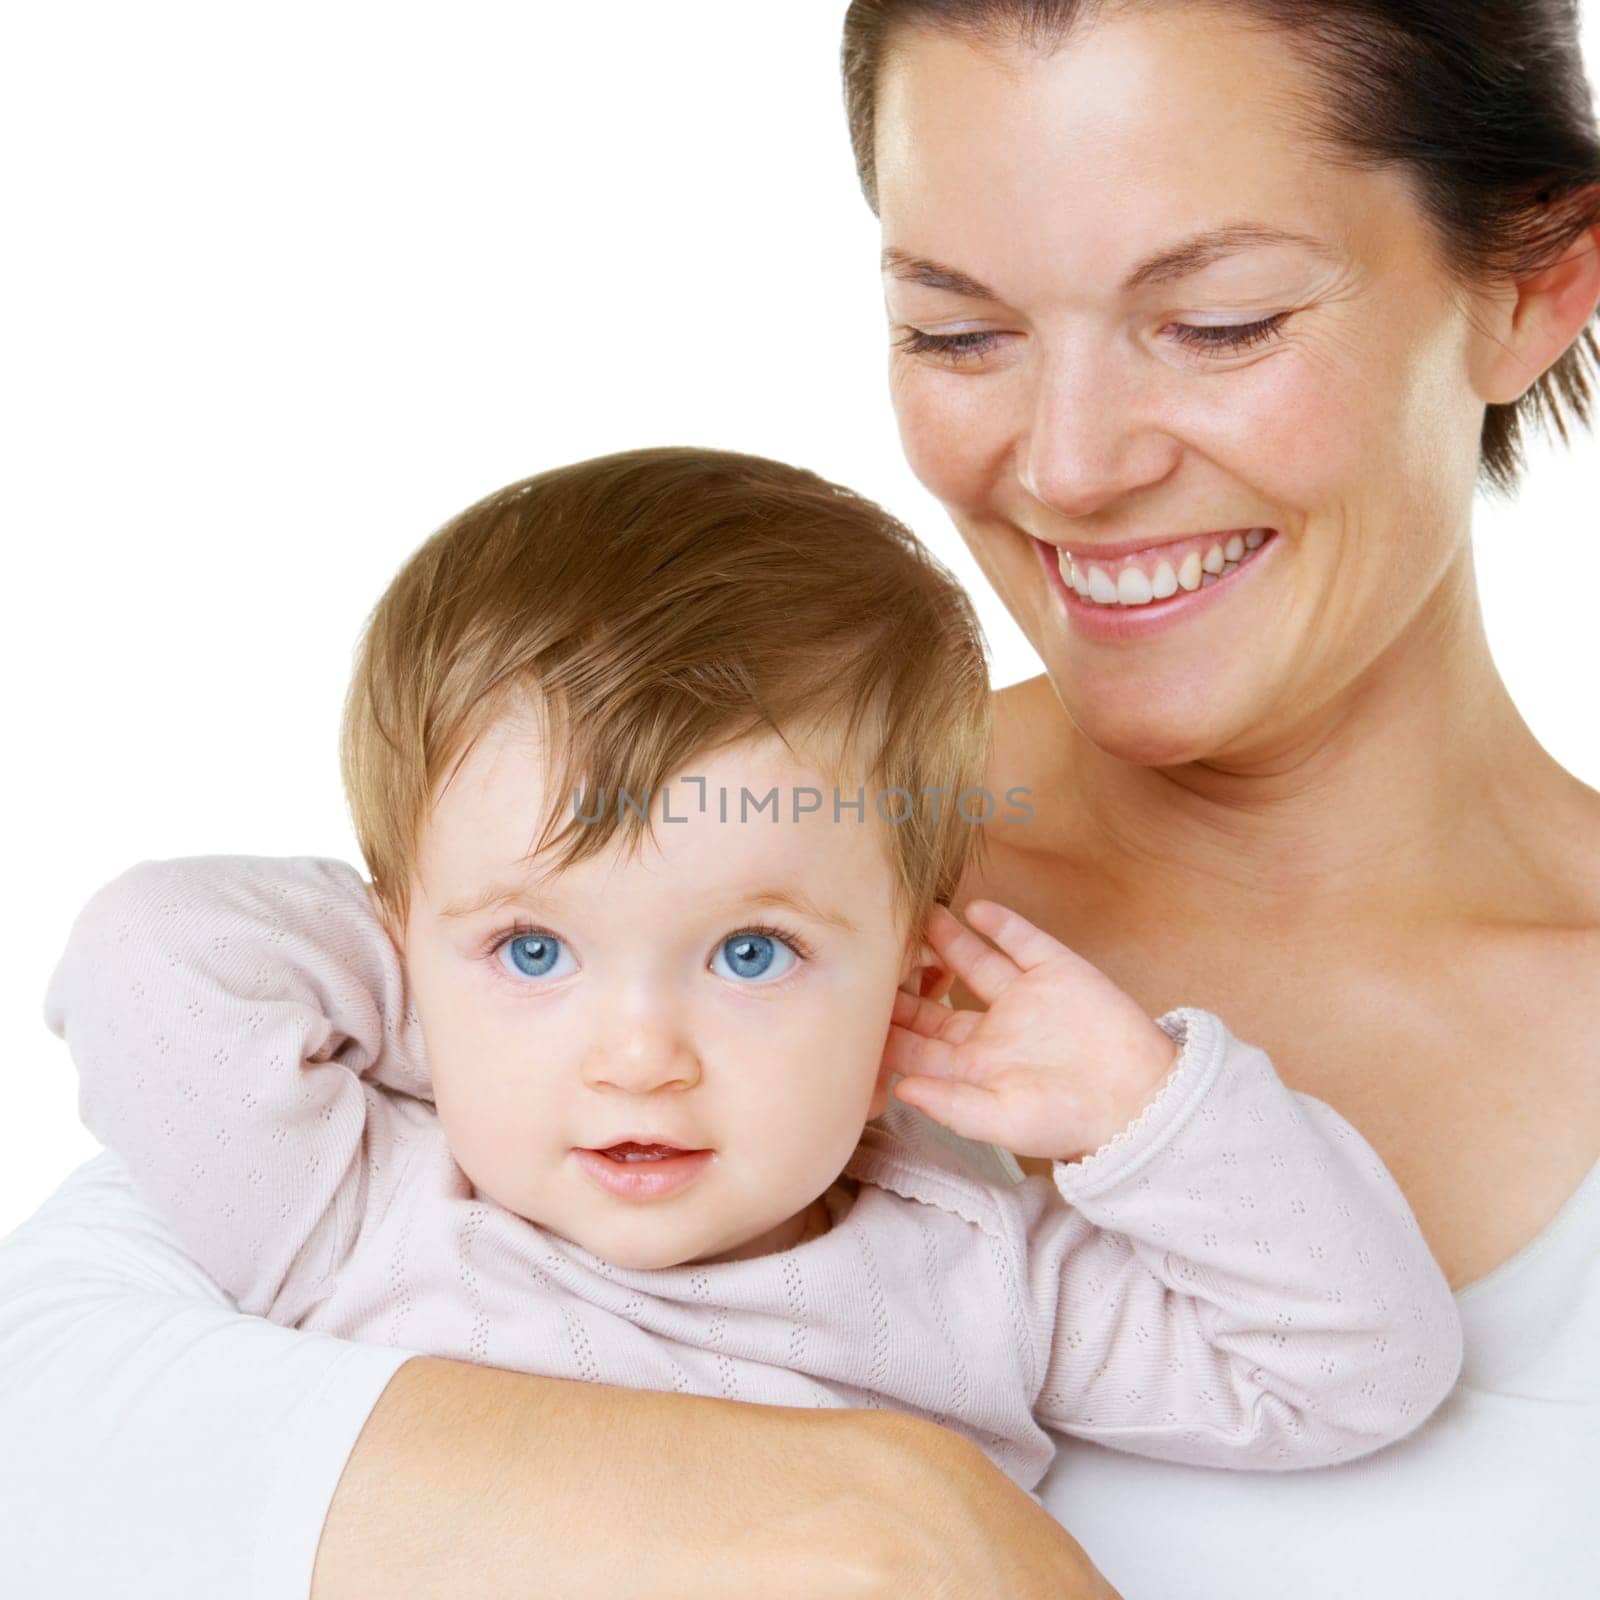 Happy, love and mother with baby, hug and smile in studio, cheerful and enjoying motherhood against a white background. Face, children and parent with little boy, hugging and bonding while isolated.